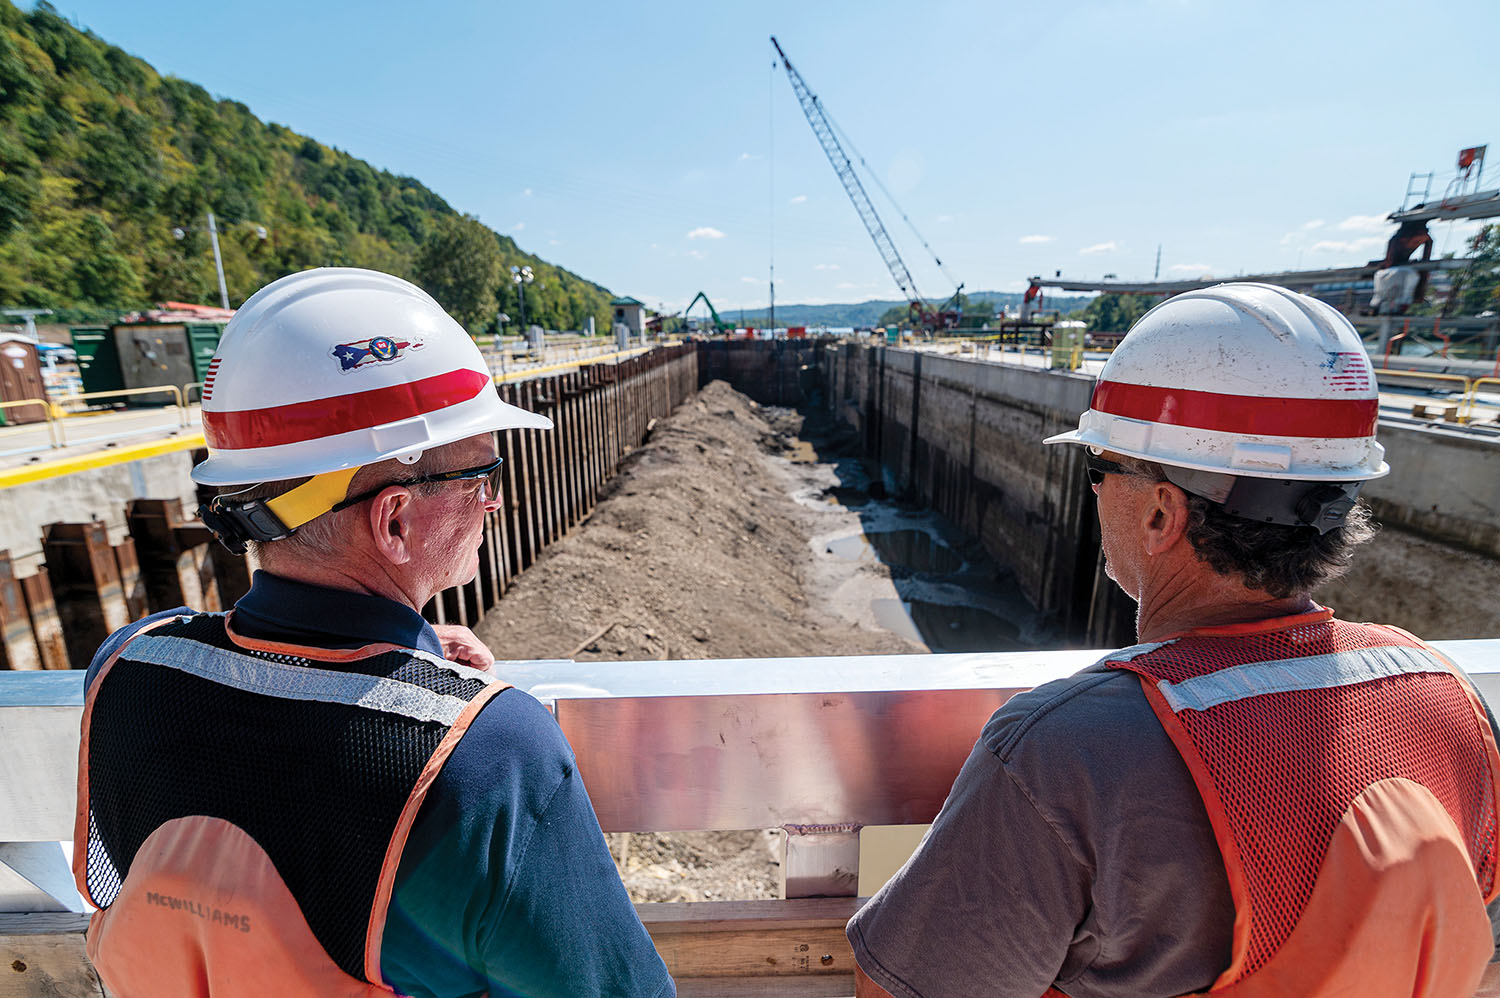 Kirk McWilliams and Shawn Soltis, resident and field engineers for the Pittsburgh Engineer District, stand over the construction project at Charleroi Locks and Dam on the lower Monongahela River in Pennsylvania on September 30. The district recently finished building the new lock chamber walls and has emptied it of approximately 20 million gallons of water to allow contractors to begin adding the mechanical inner works of the chamber. (Photo by Michel Sauret/Pittsburgh Engineer District)